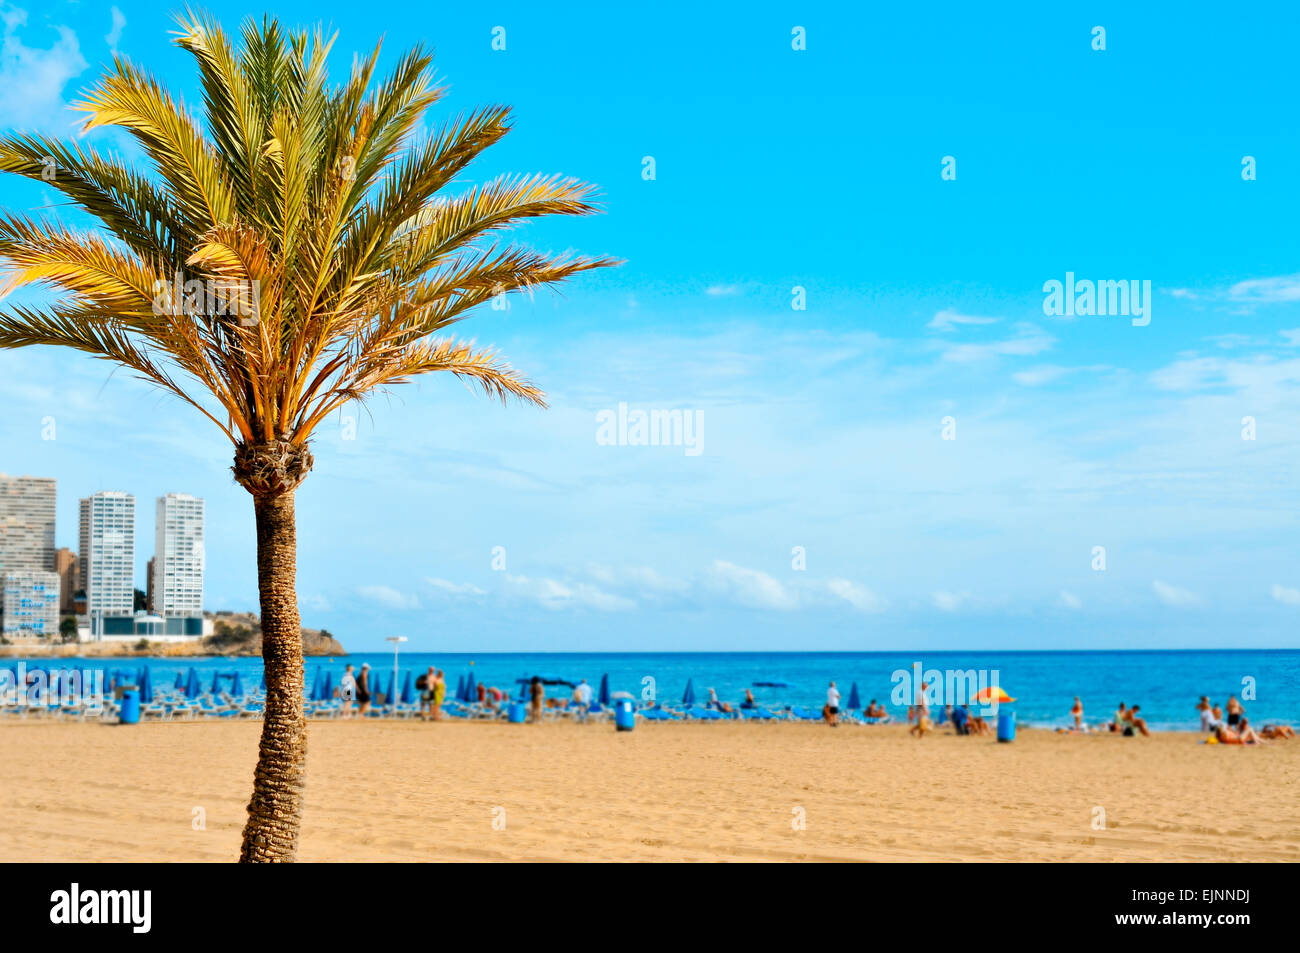 a view of Levante Beach, in Benidorm, Spain, with blurred vacationers hanging out on the sand in the background Stock Photo